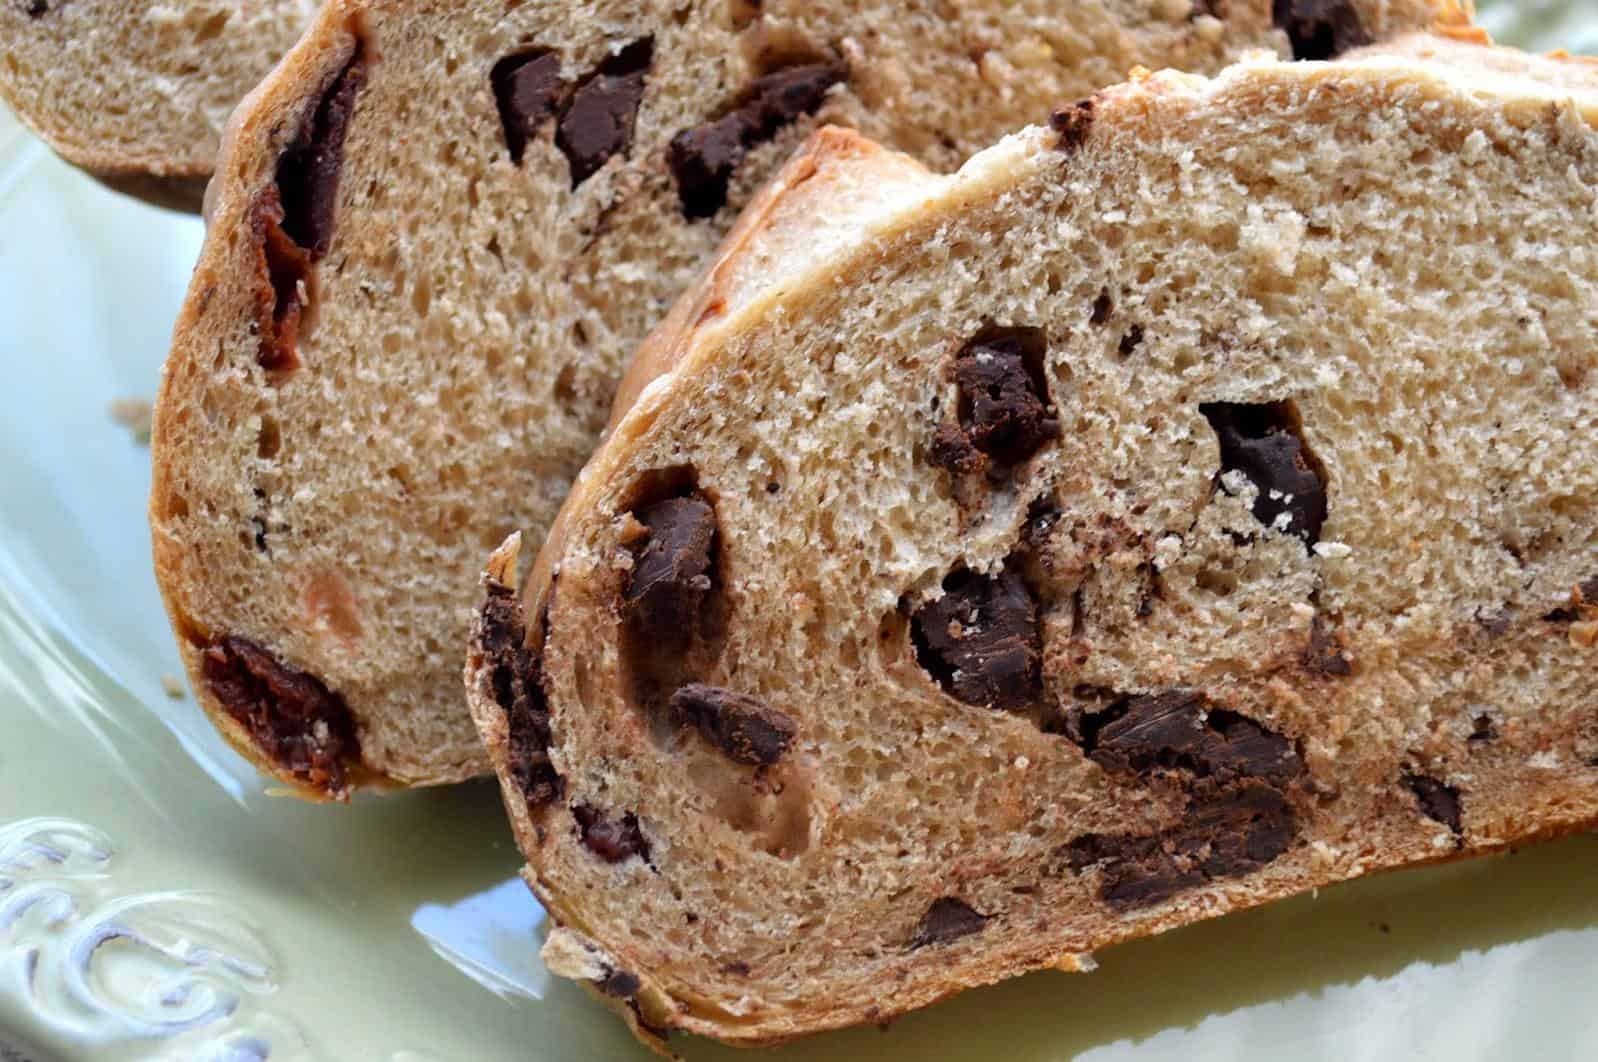  Indulge in the ultimate chocolate lover's dream with our Stout Chocolate-Cherry Bread!